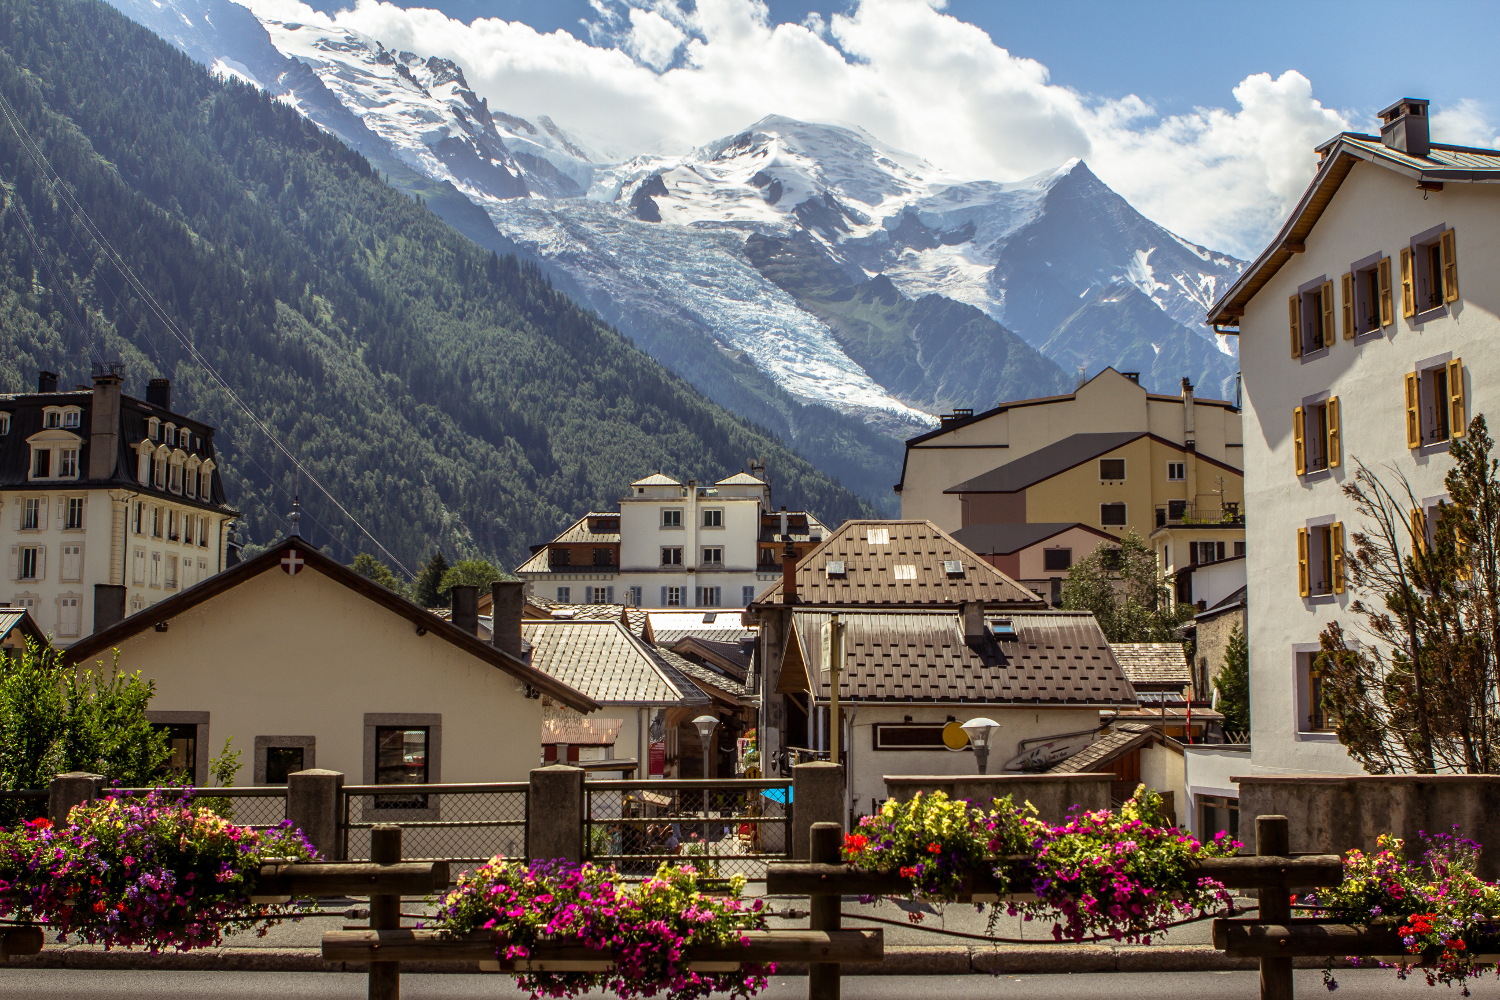 View on the Mont Blanc massif and glacier from Chamonix, #France, #travel #best #photos and #places